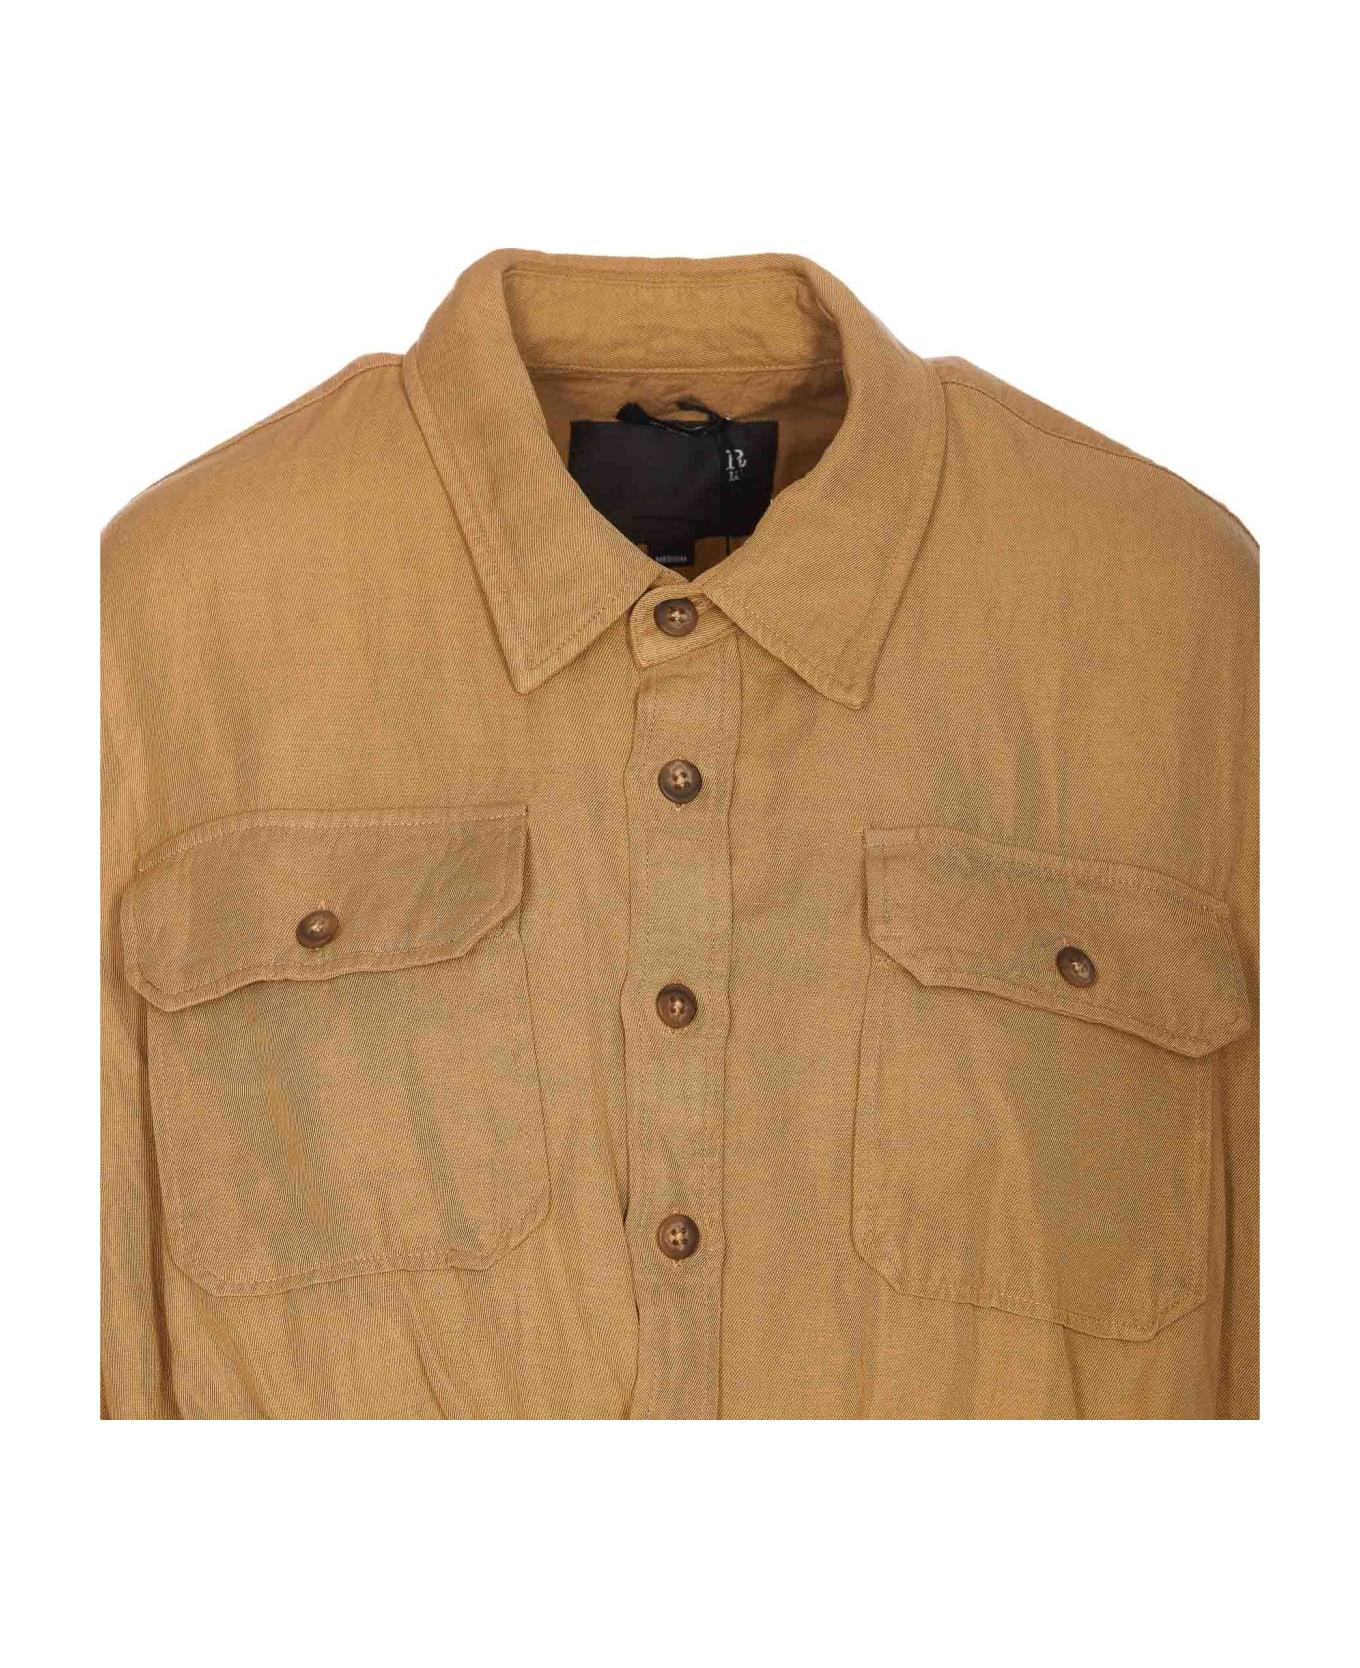 R13 Crossover Utility Bubble Shirt - Beige